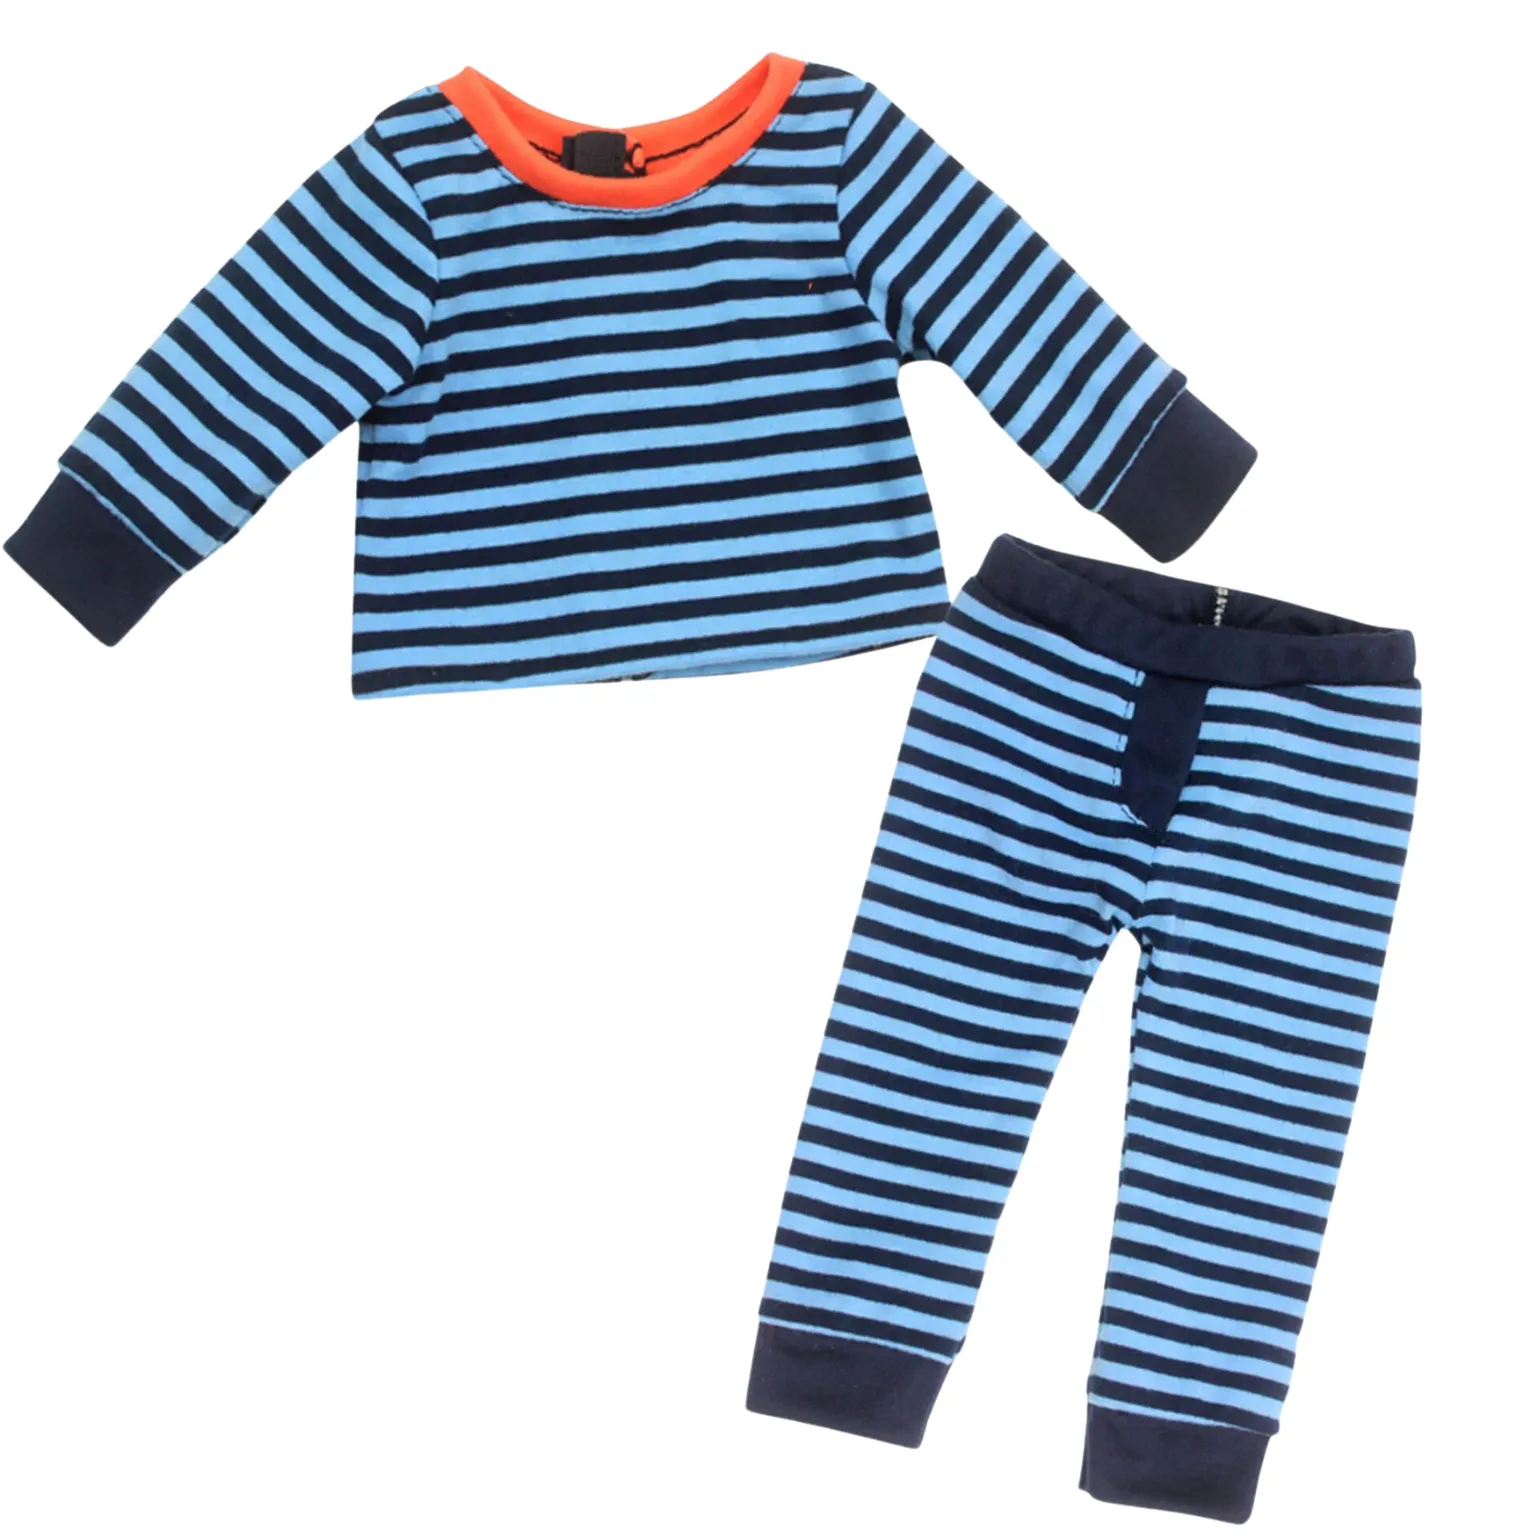 Striped Pajama manufacturing with recycled materials